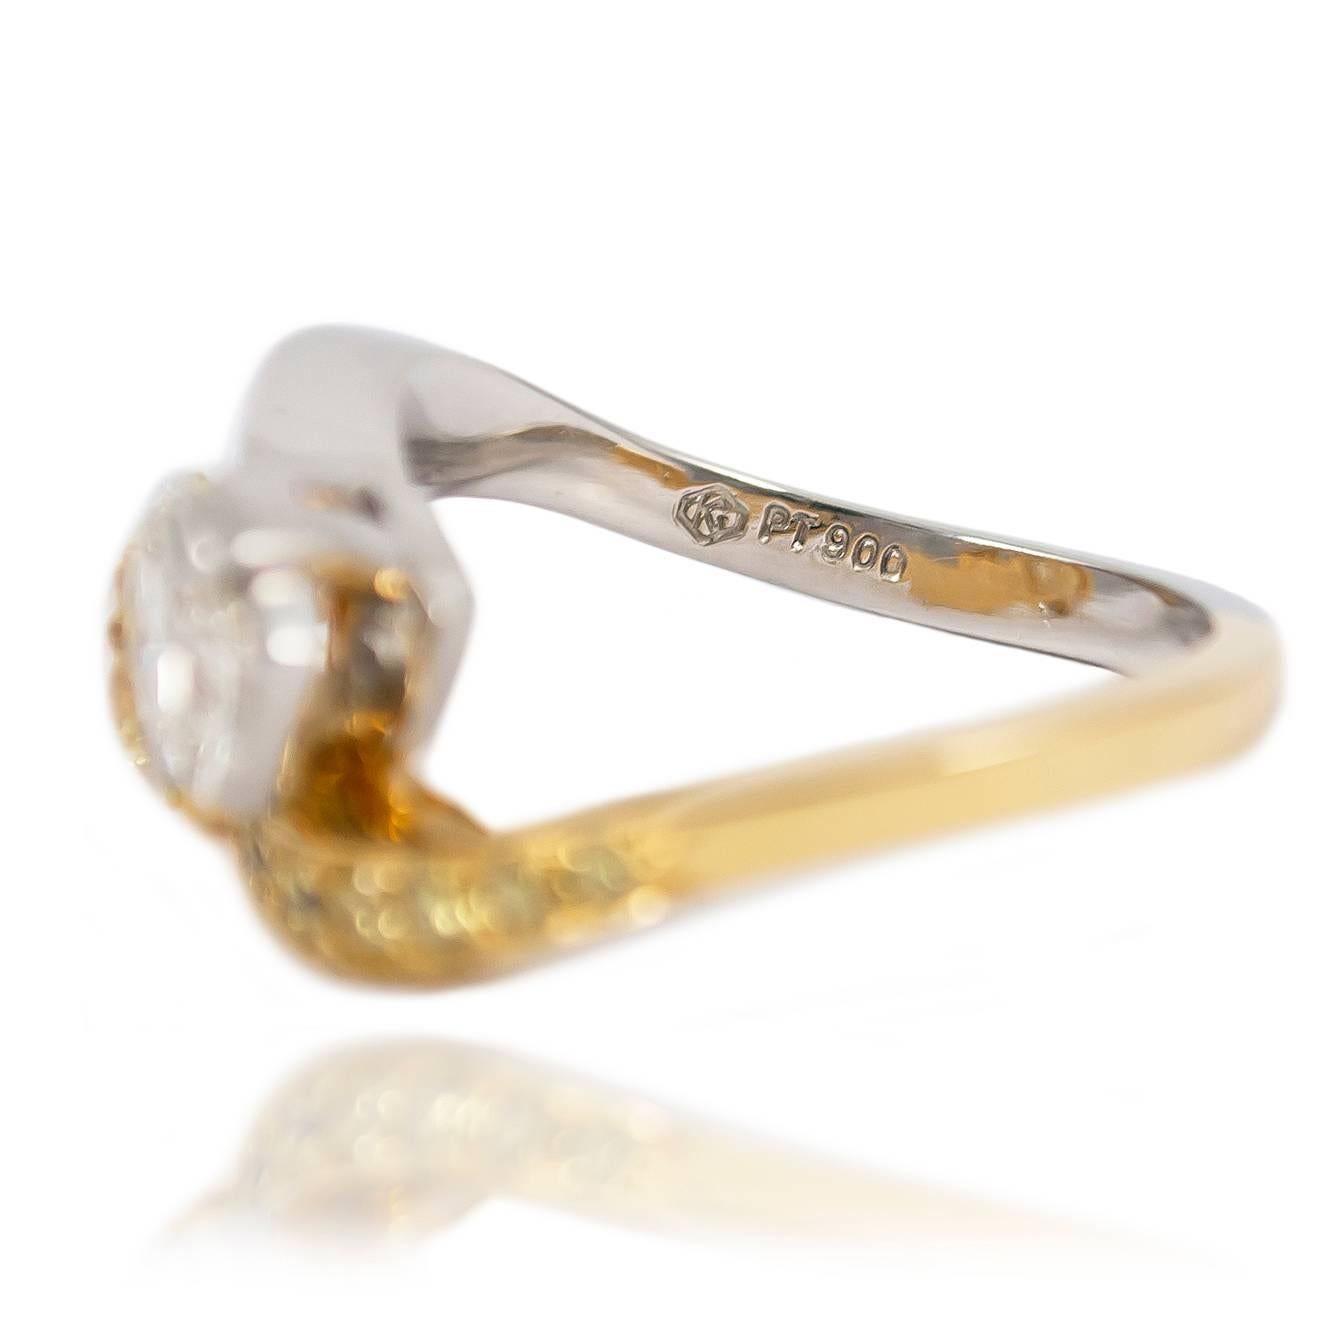 Women's 2.74 carats GIA Fancy Yellow and White Diamond Crossover Ring